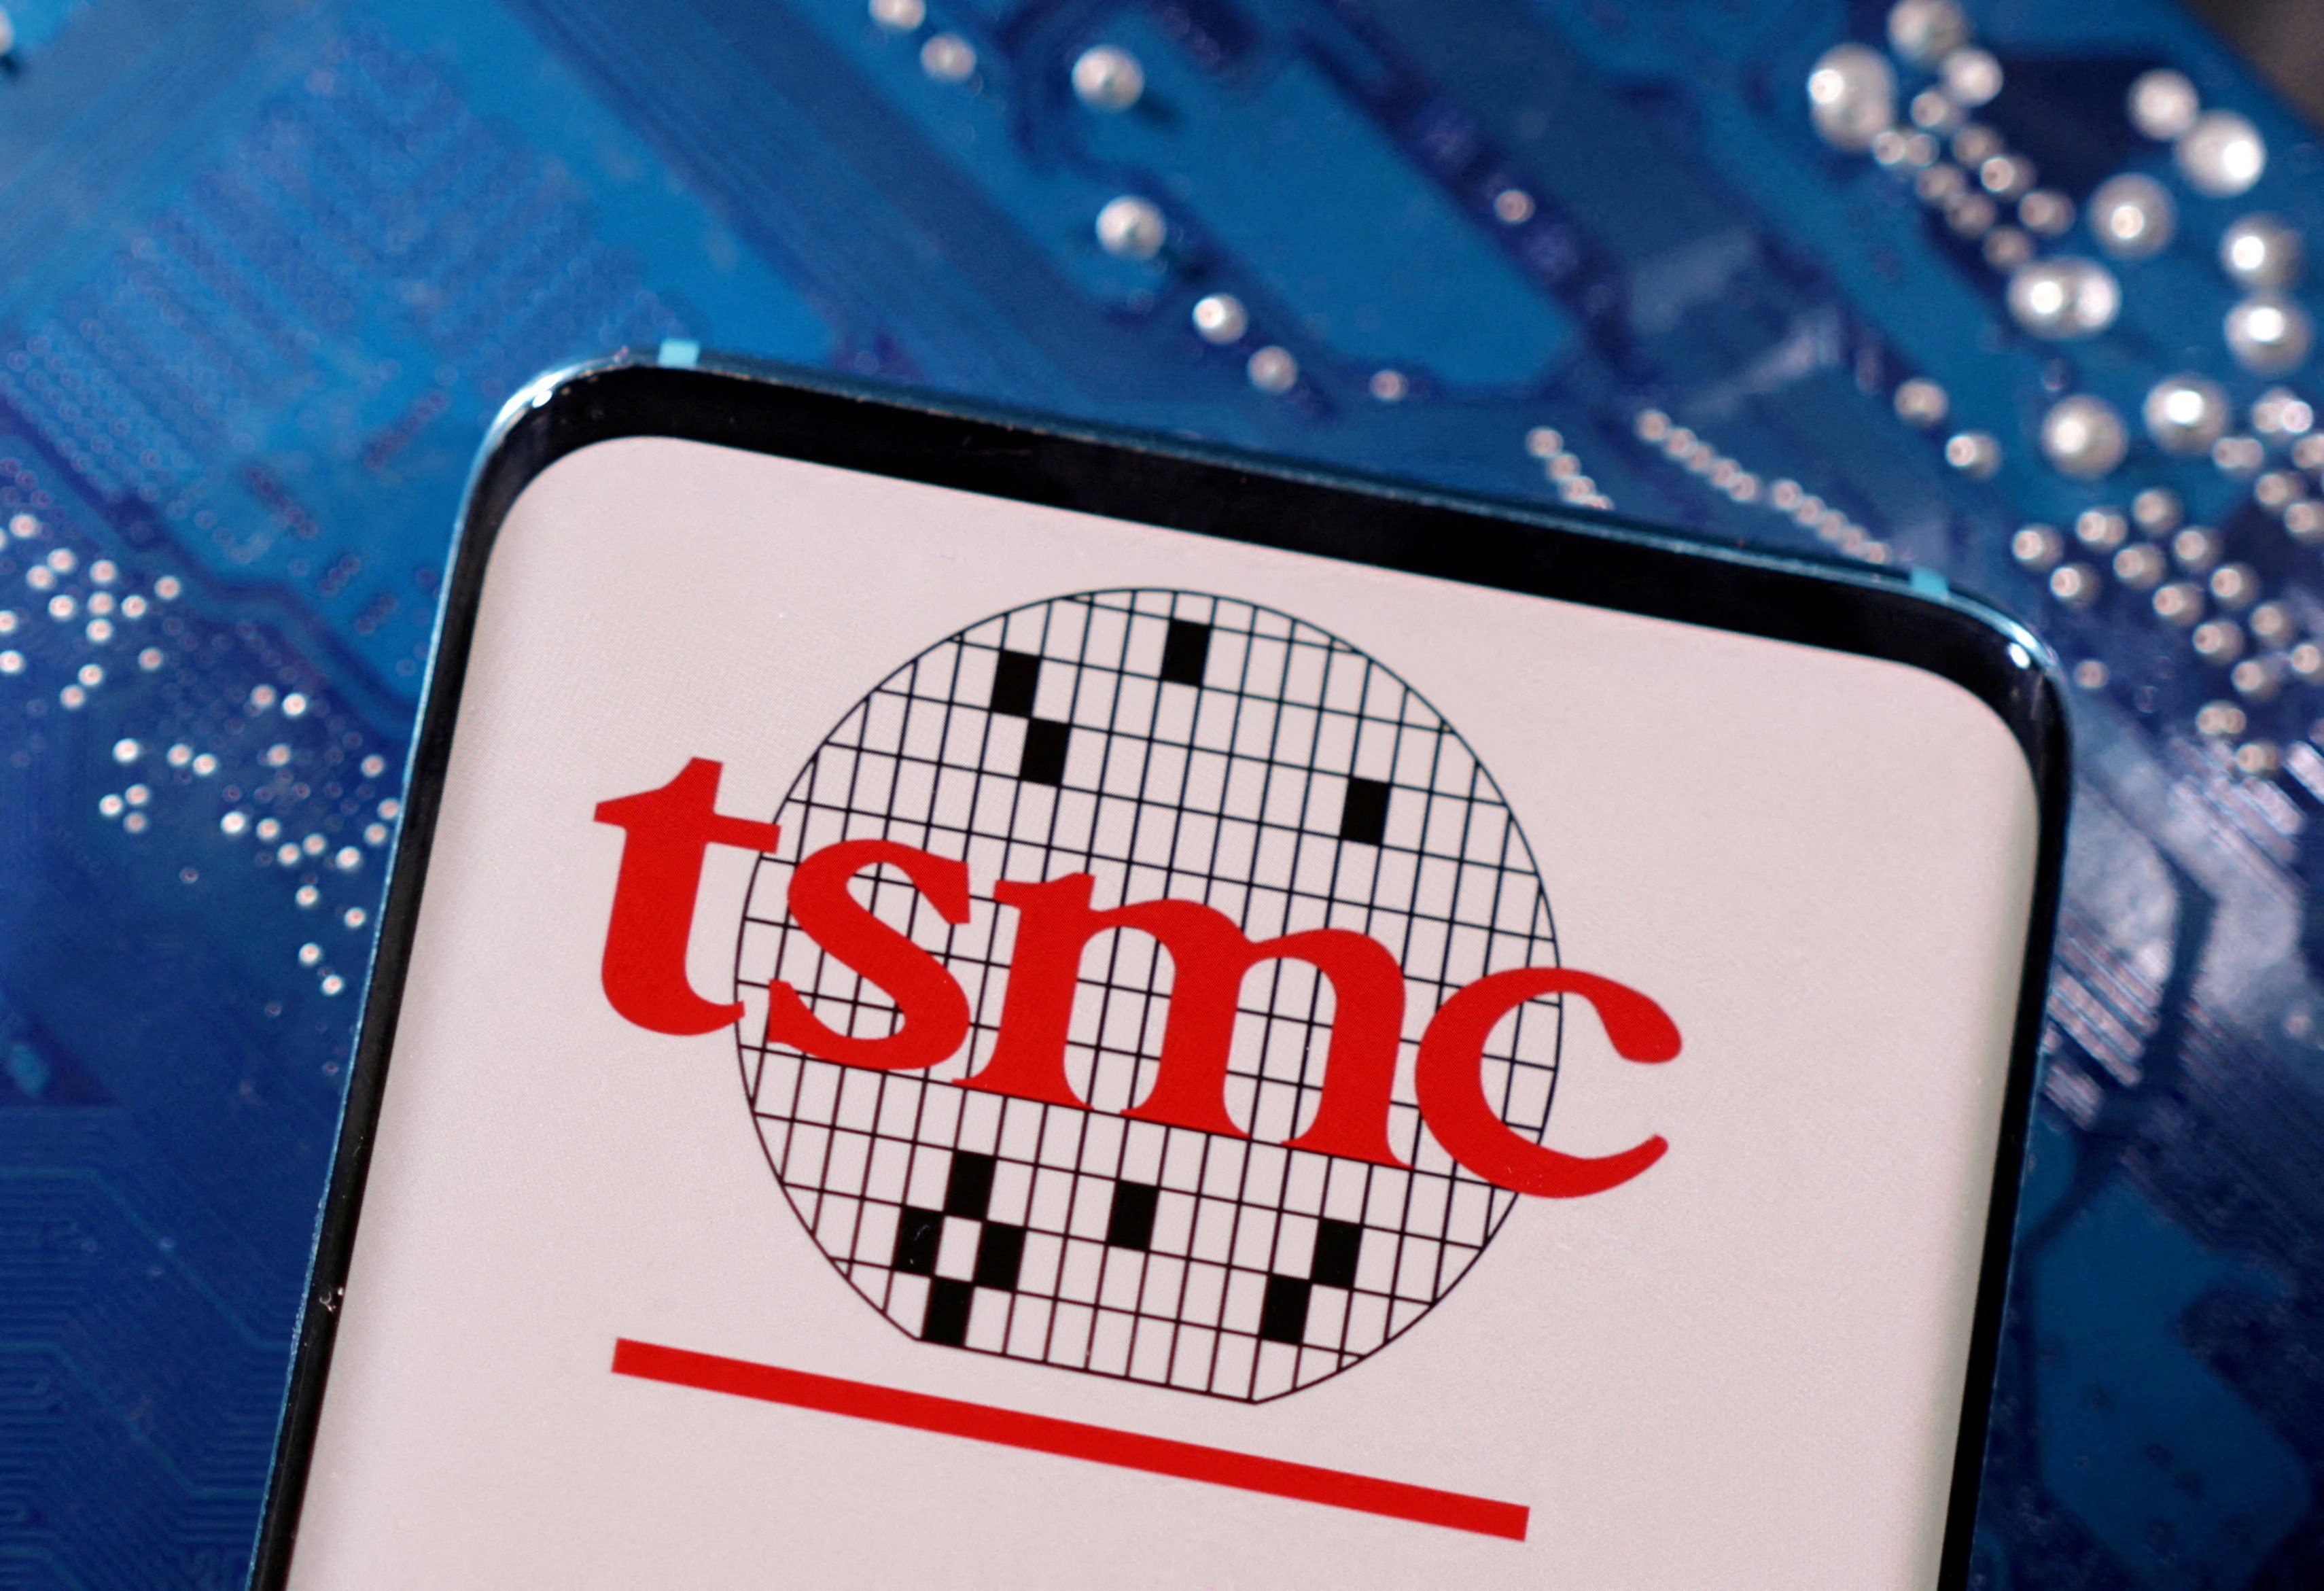 Zhang bought 112,000 shares of TSMC, the world’s biggest contract chip maker, for the Asian Elite Fund in the first three months. Photo: Reuters